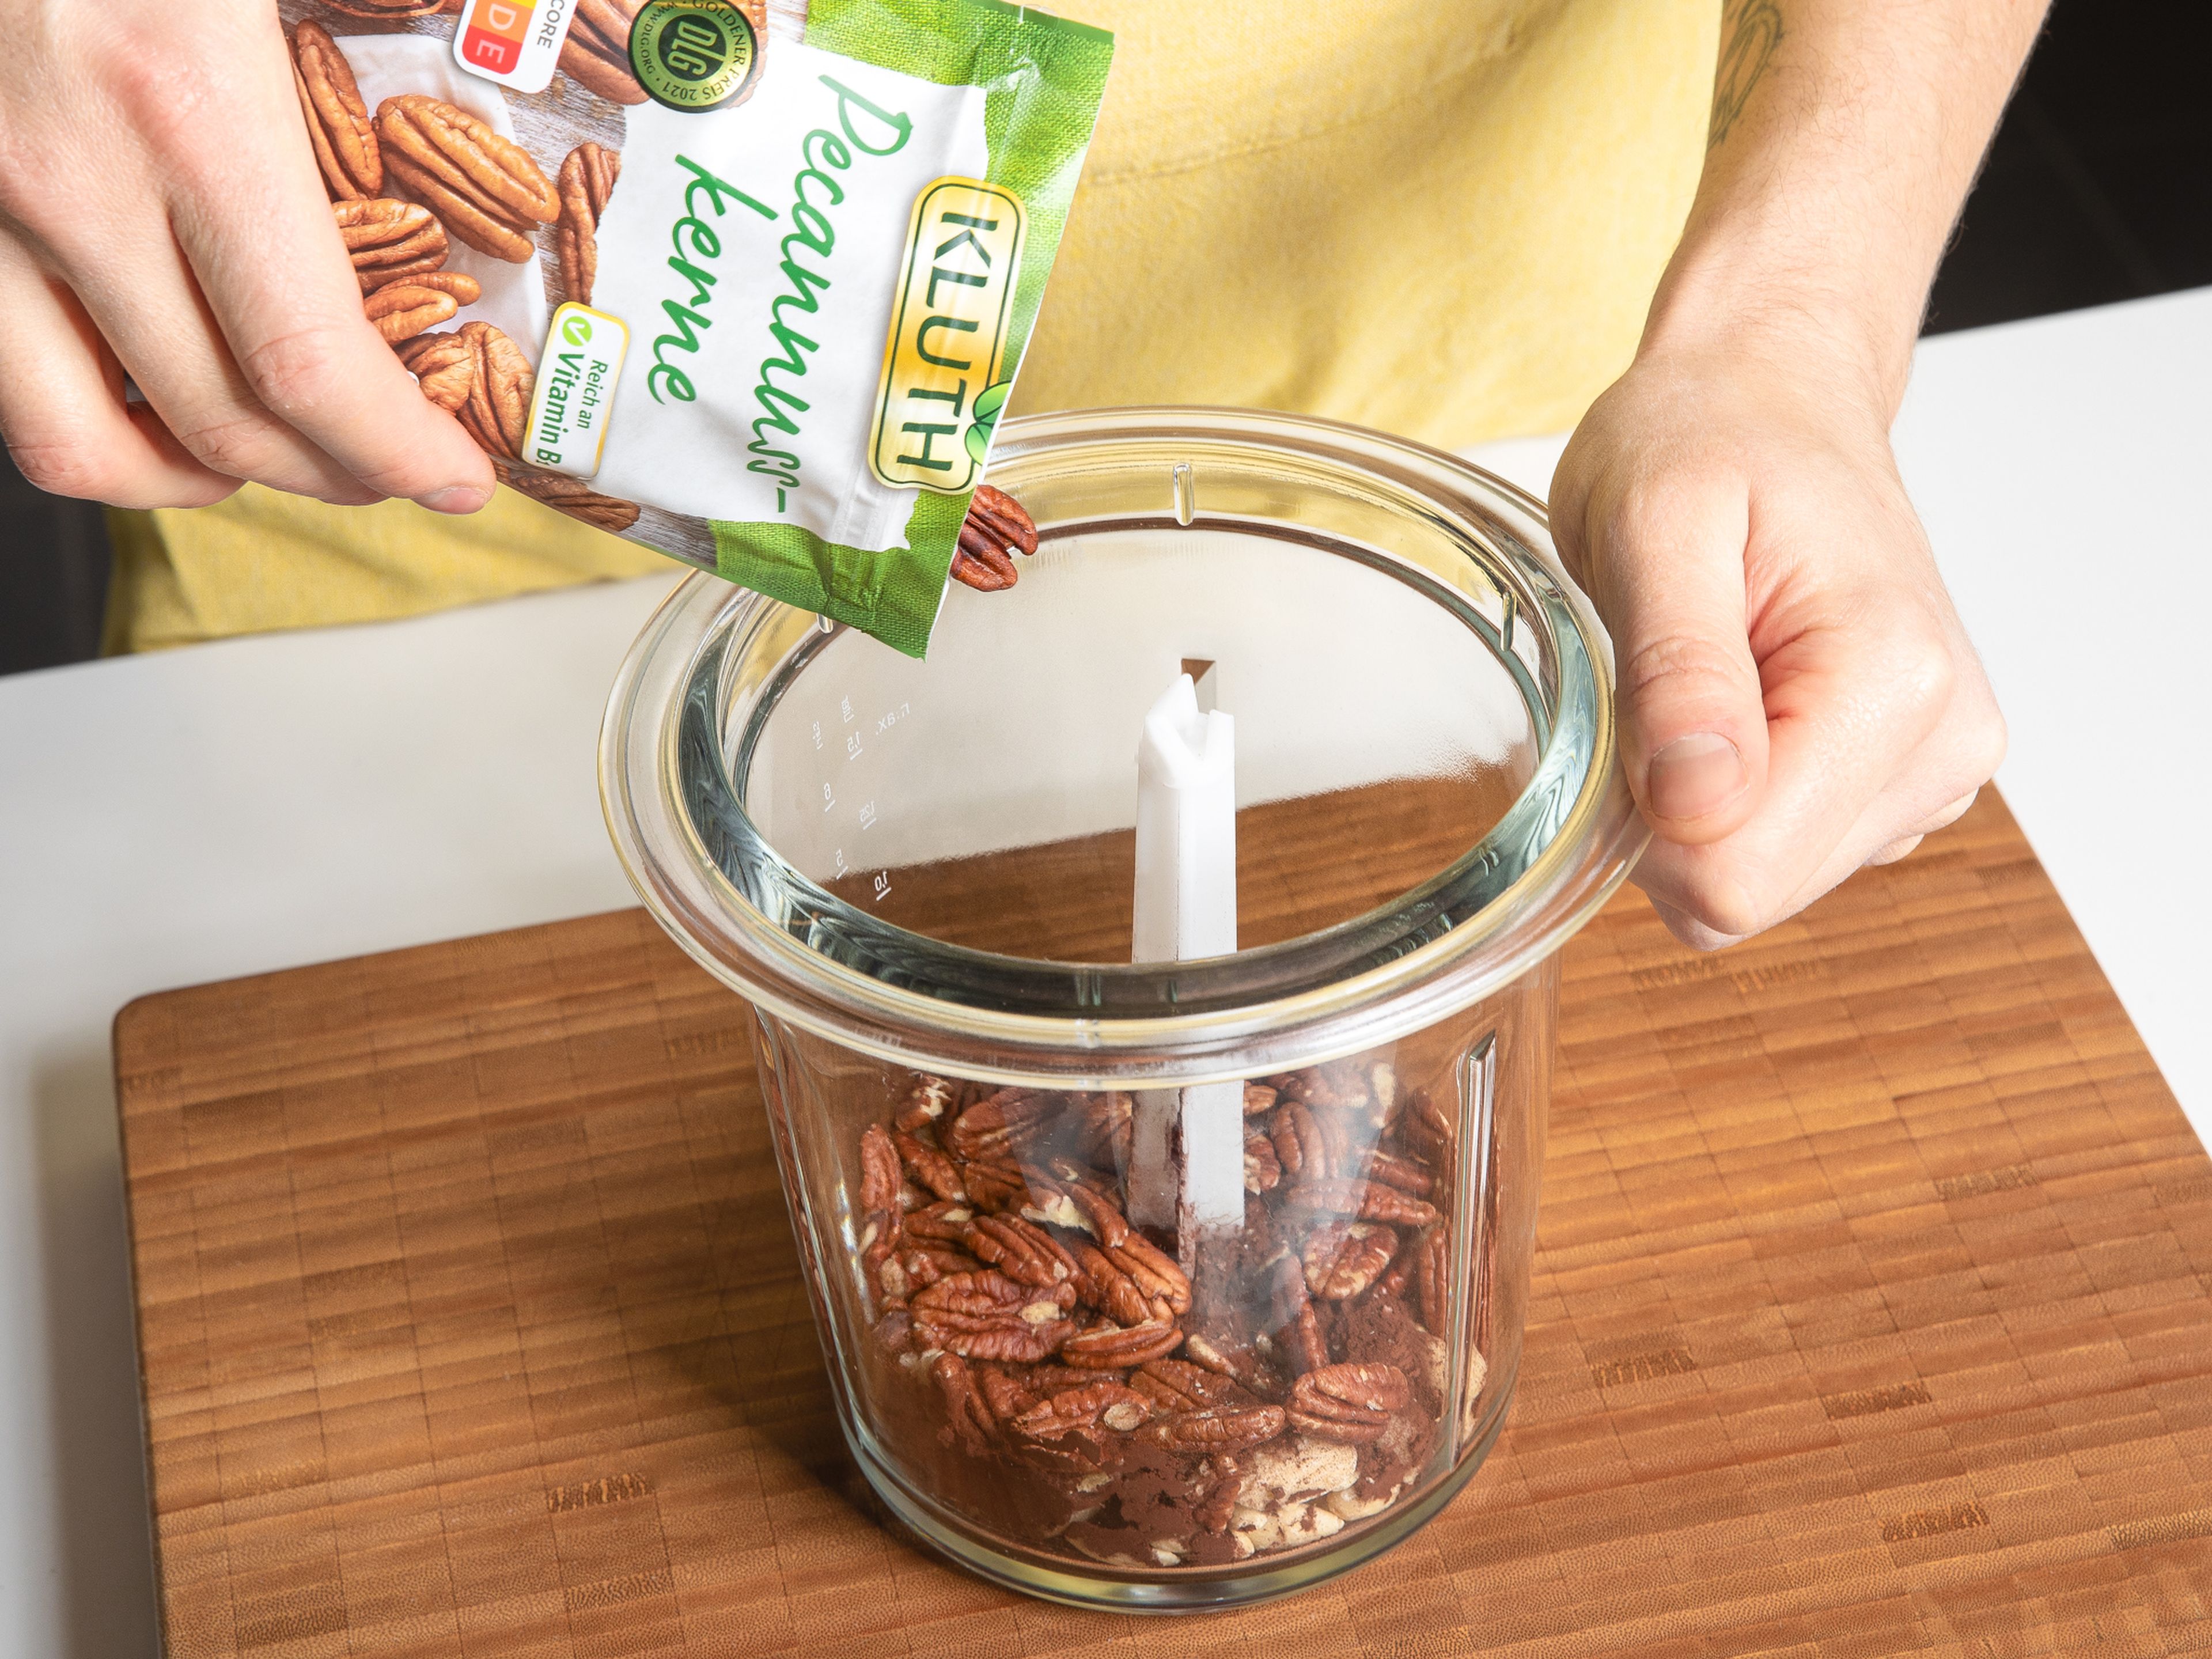 Grind pecans, almonds, some of the cocoa powder, and salt in a food processor. Add dates and water and mix until the ingredients come together into a thick paste.